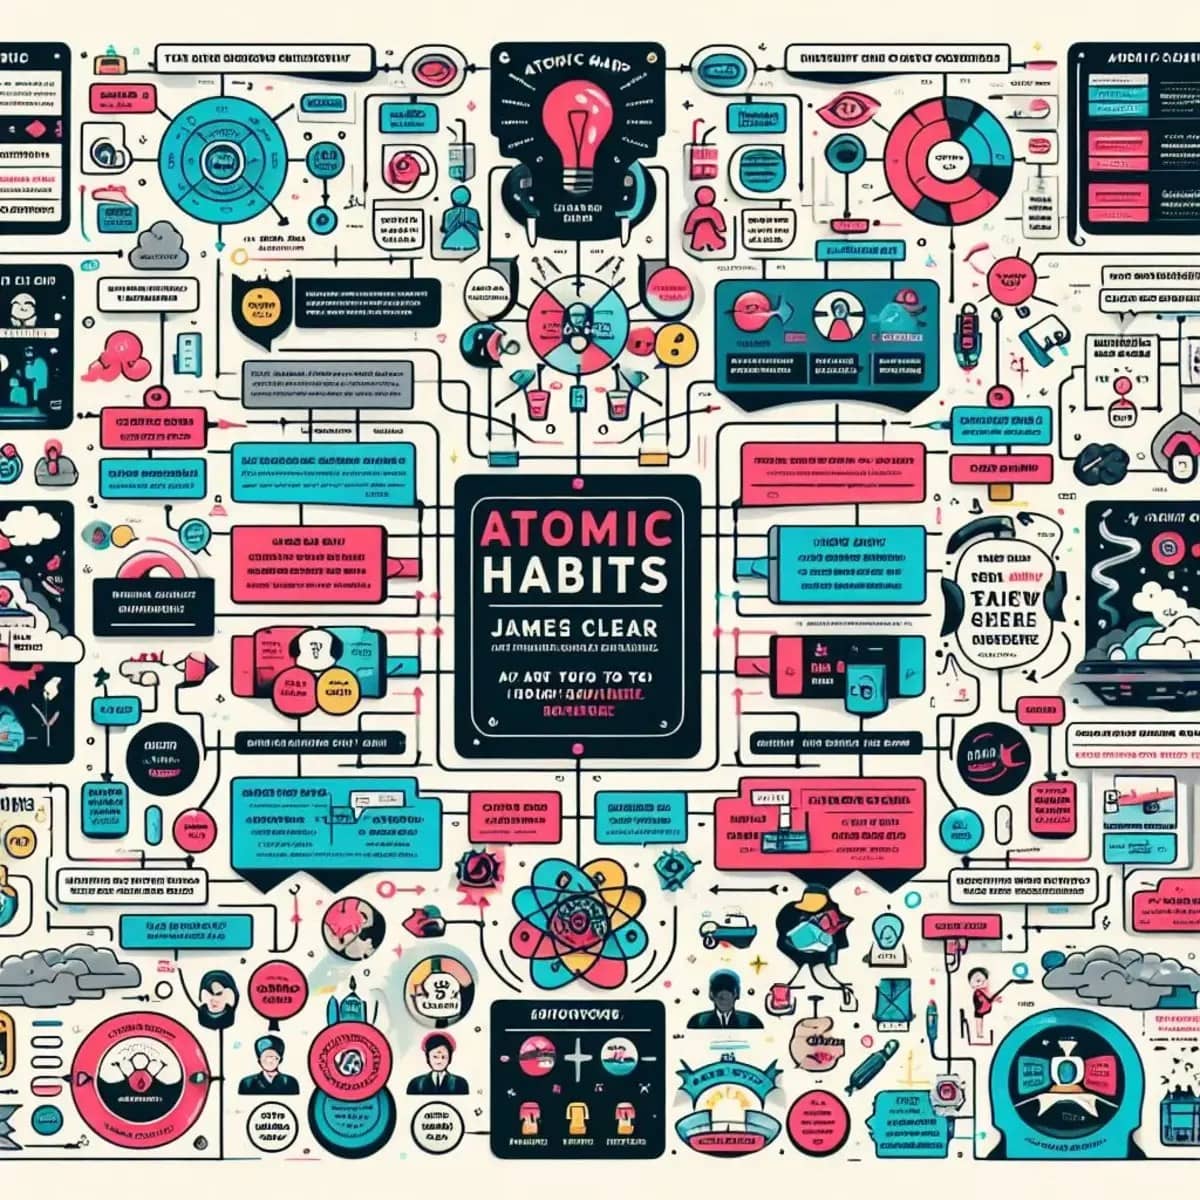 A Comprehensive Book Summary of "Atomic Habits" with 8 Key Takeaways